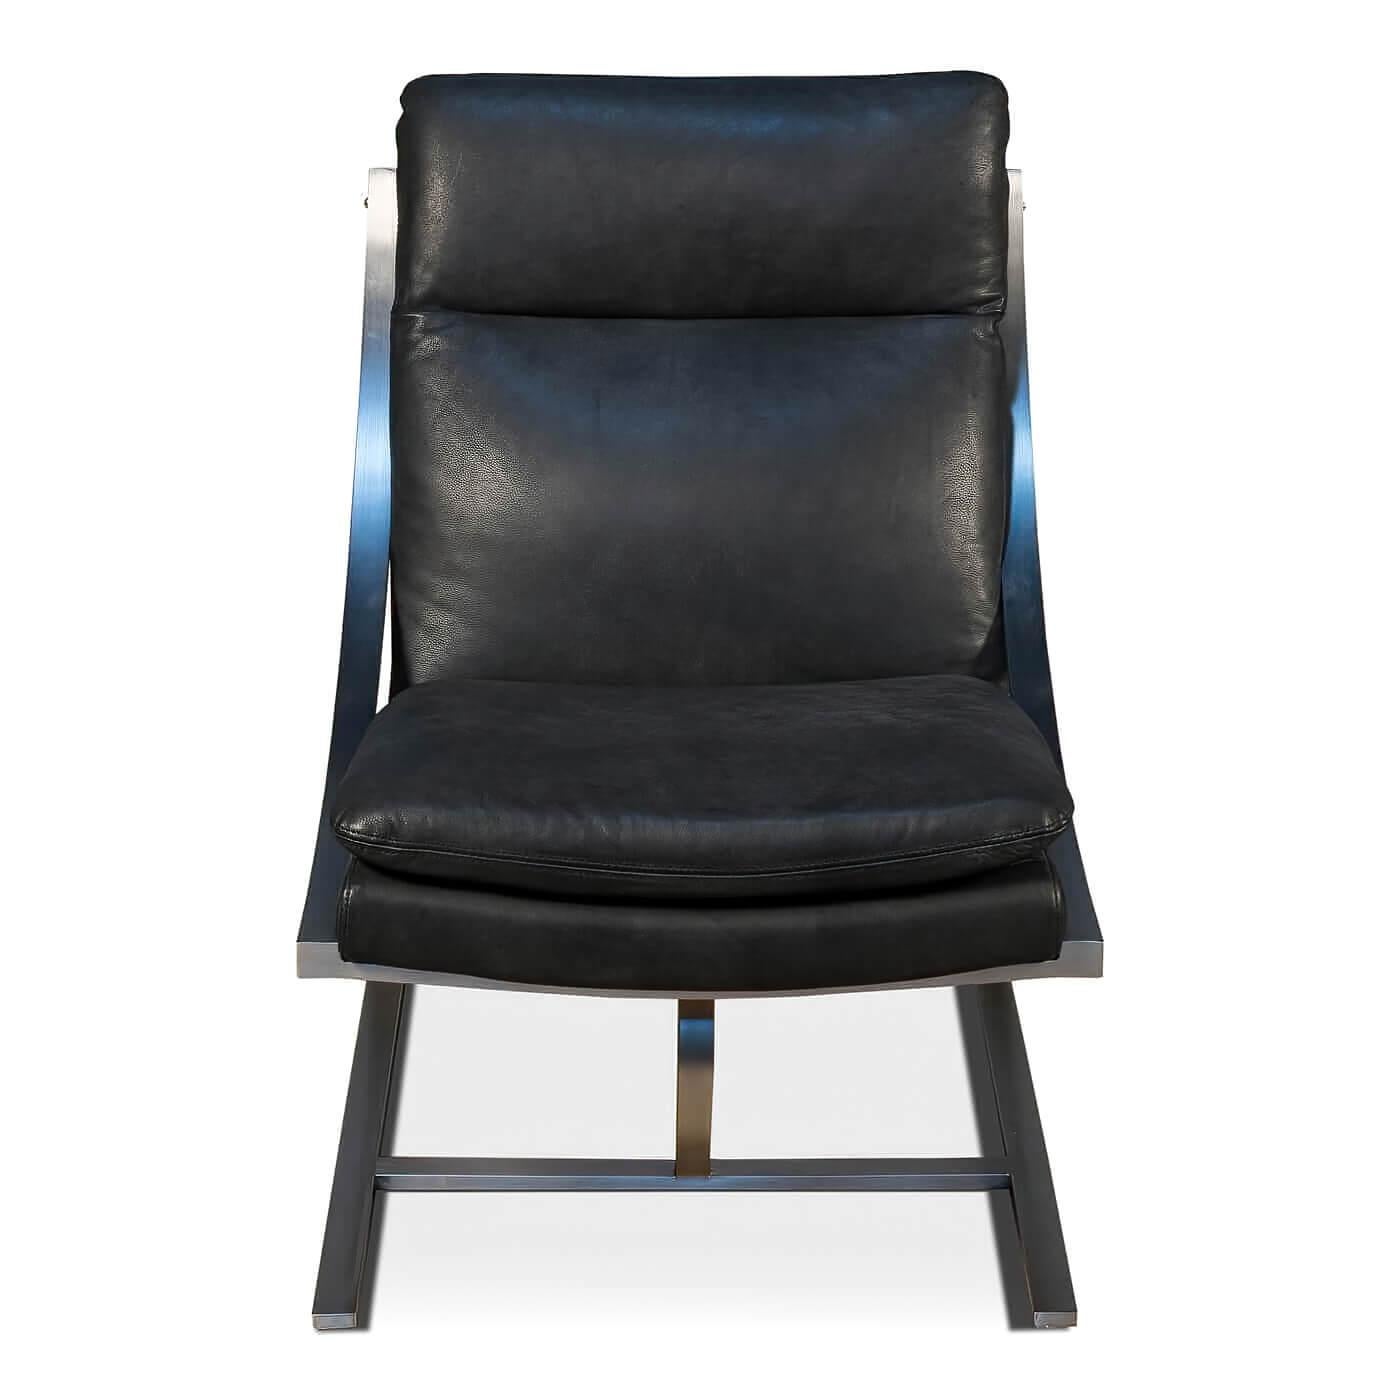 Modern stainless steel and leather chair, warm luxurious black leather with a brushed stainless steel design in a clean and contemporary design. 

Crafted of pure Aneline top-grade leather in Black 